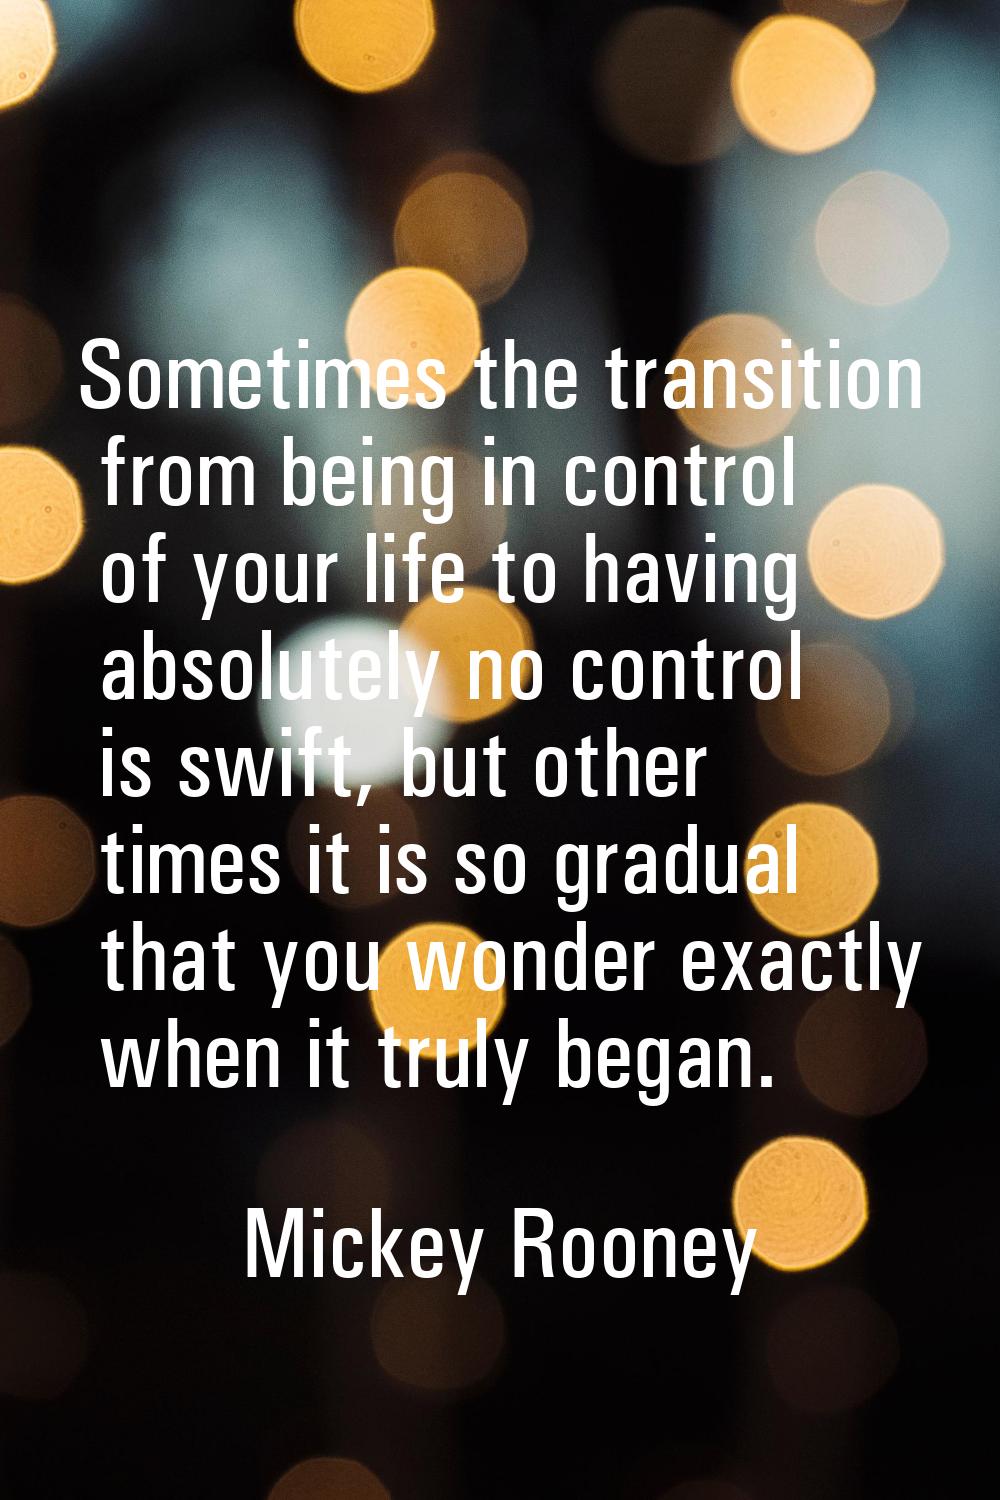 Sometimes the transition from being in control of your life to having absolutely no control is swif